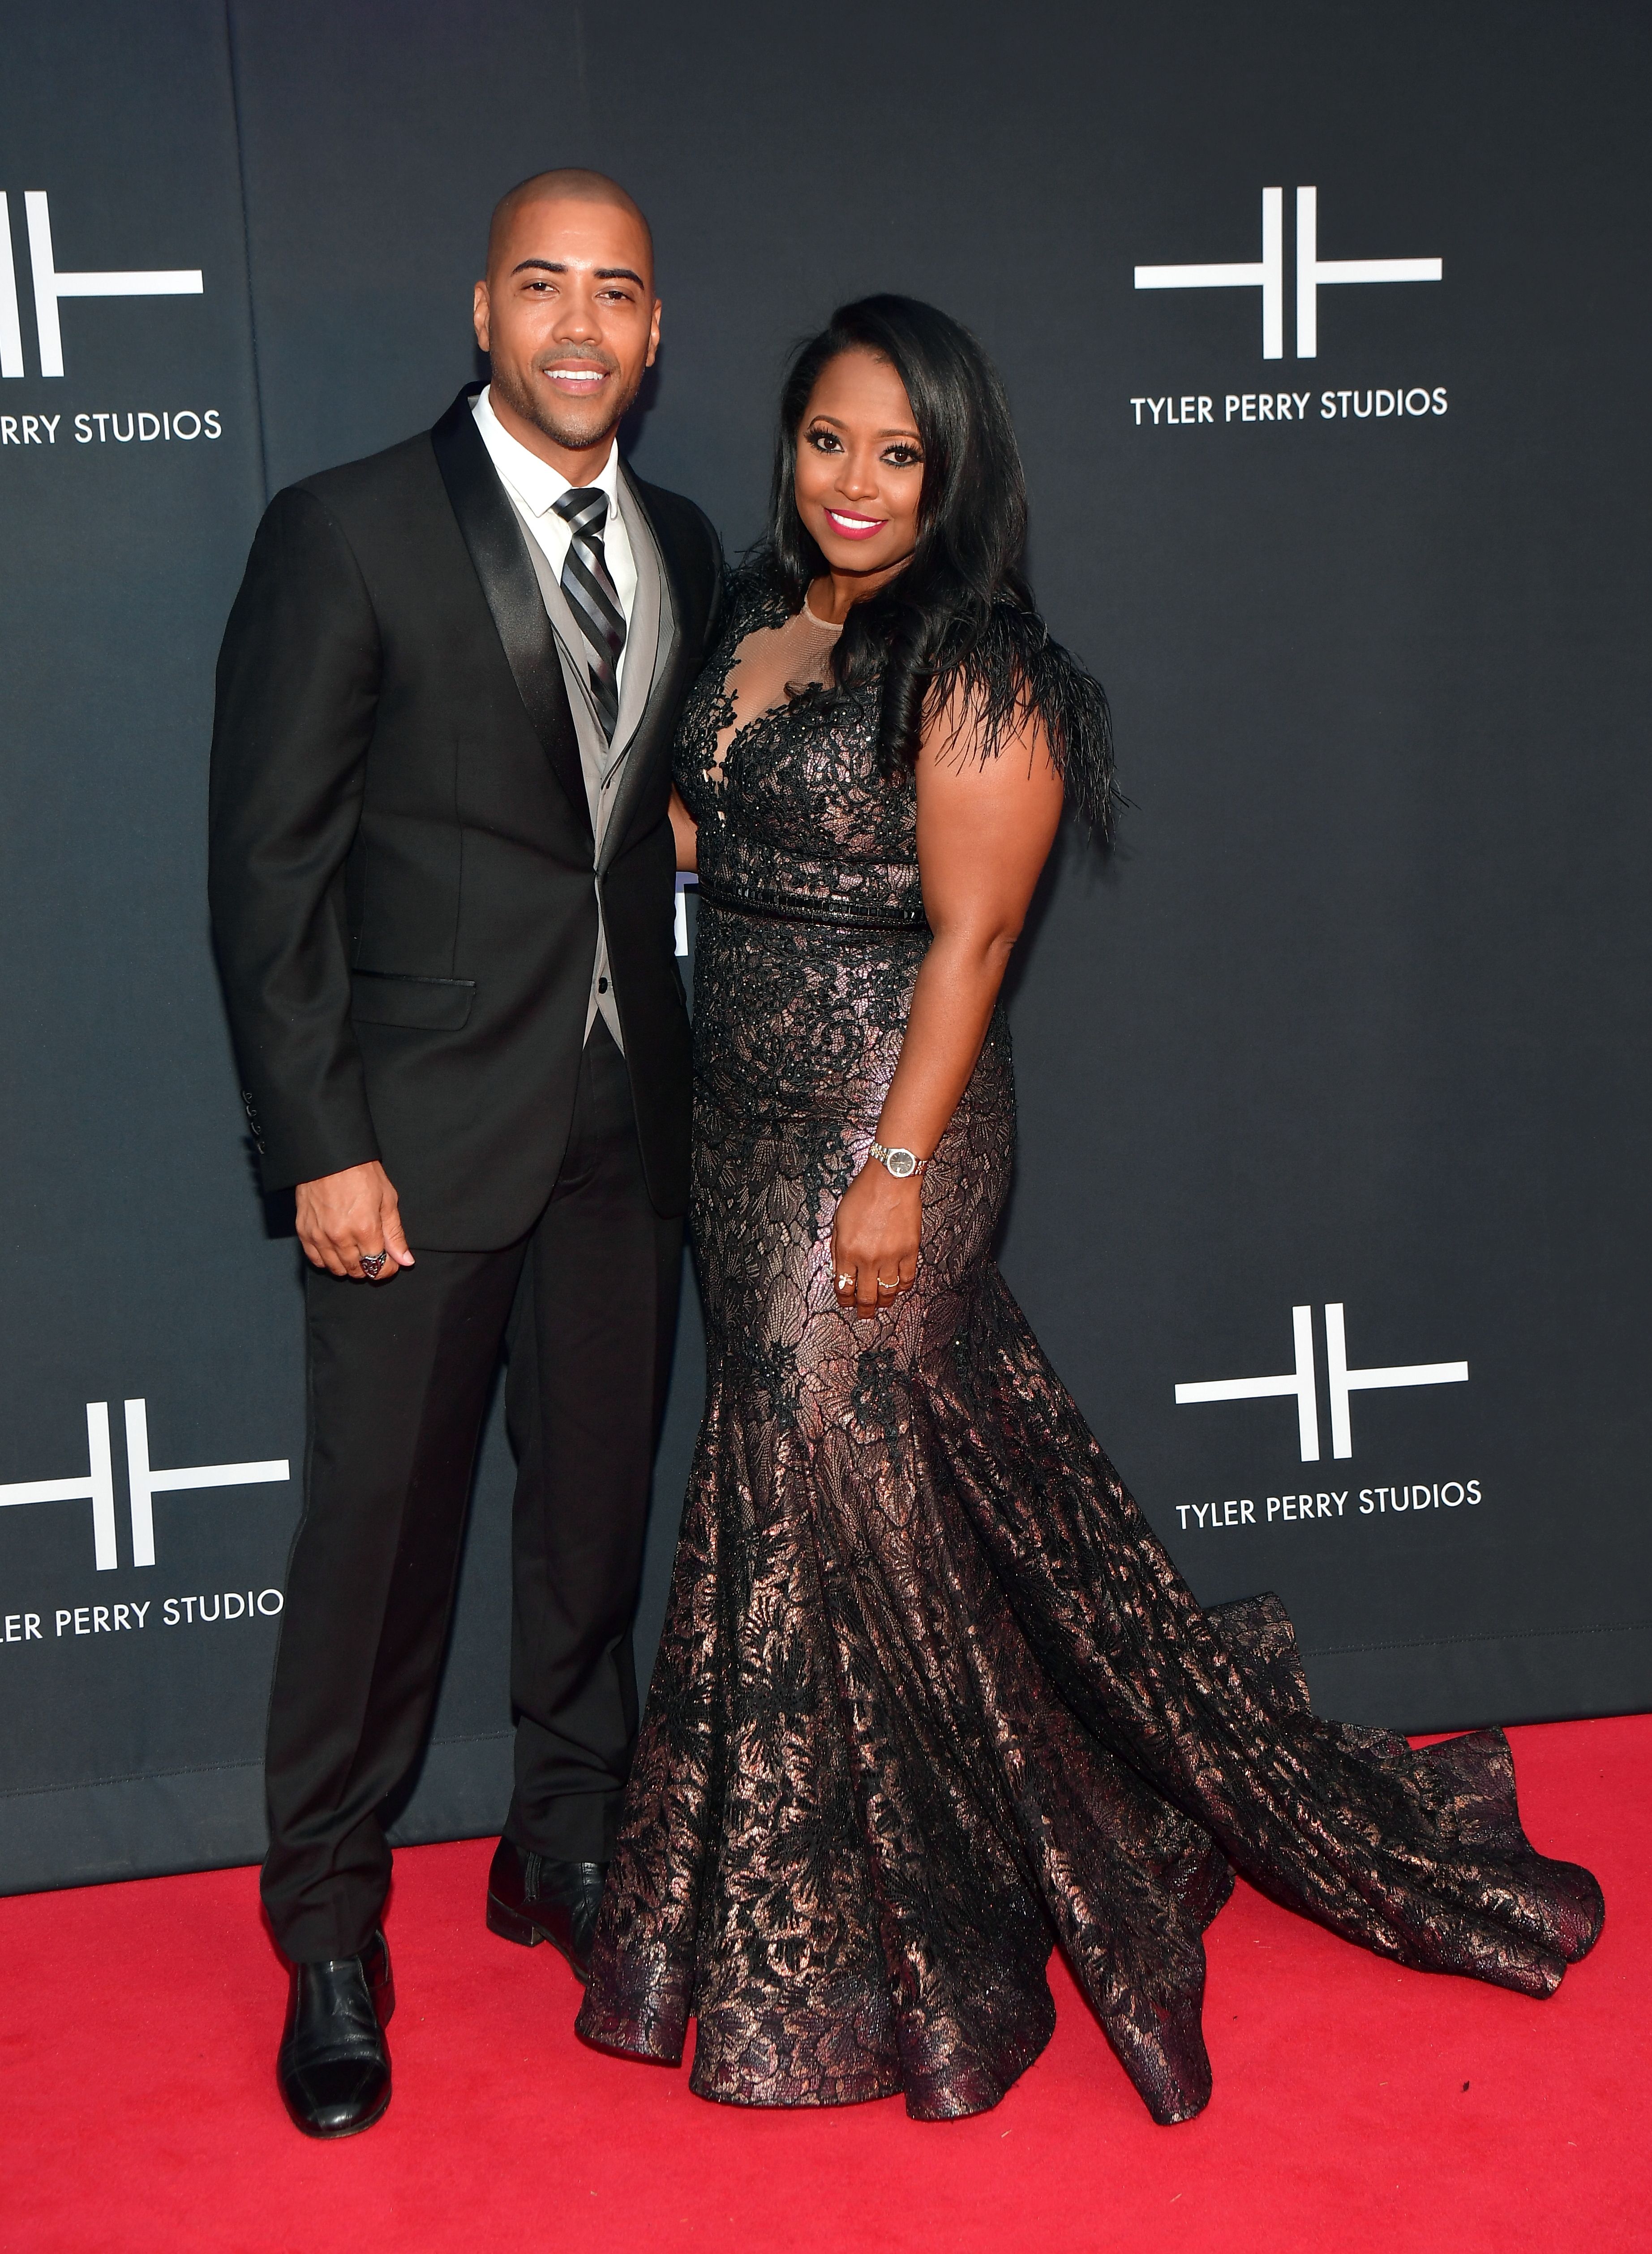 Brad James and Keshia Knight Pulliam during Tyler Perry Studios' Grand Opening Gala - Arrivals at Tyler Perry Studios on October 5, 2019 in Atlanta, Georgia. | Source: Getty Images